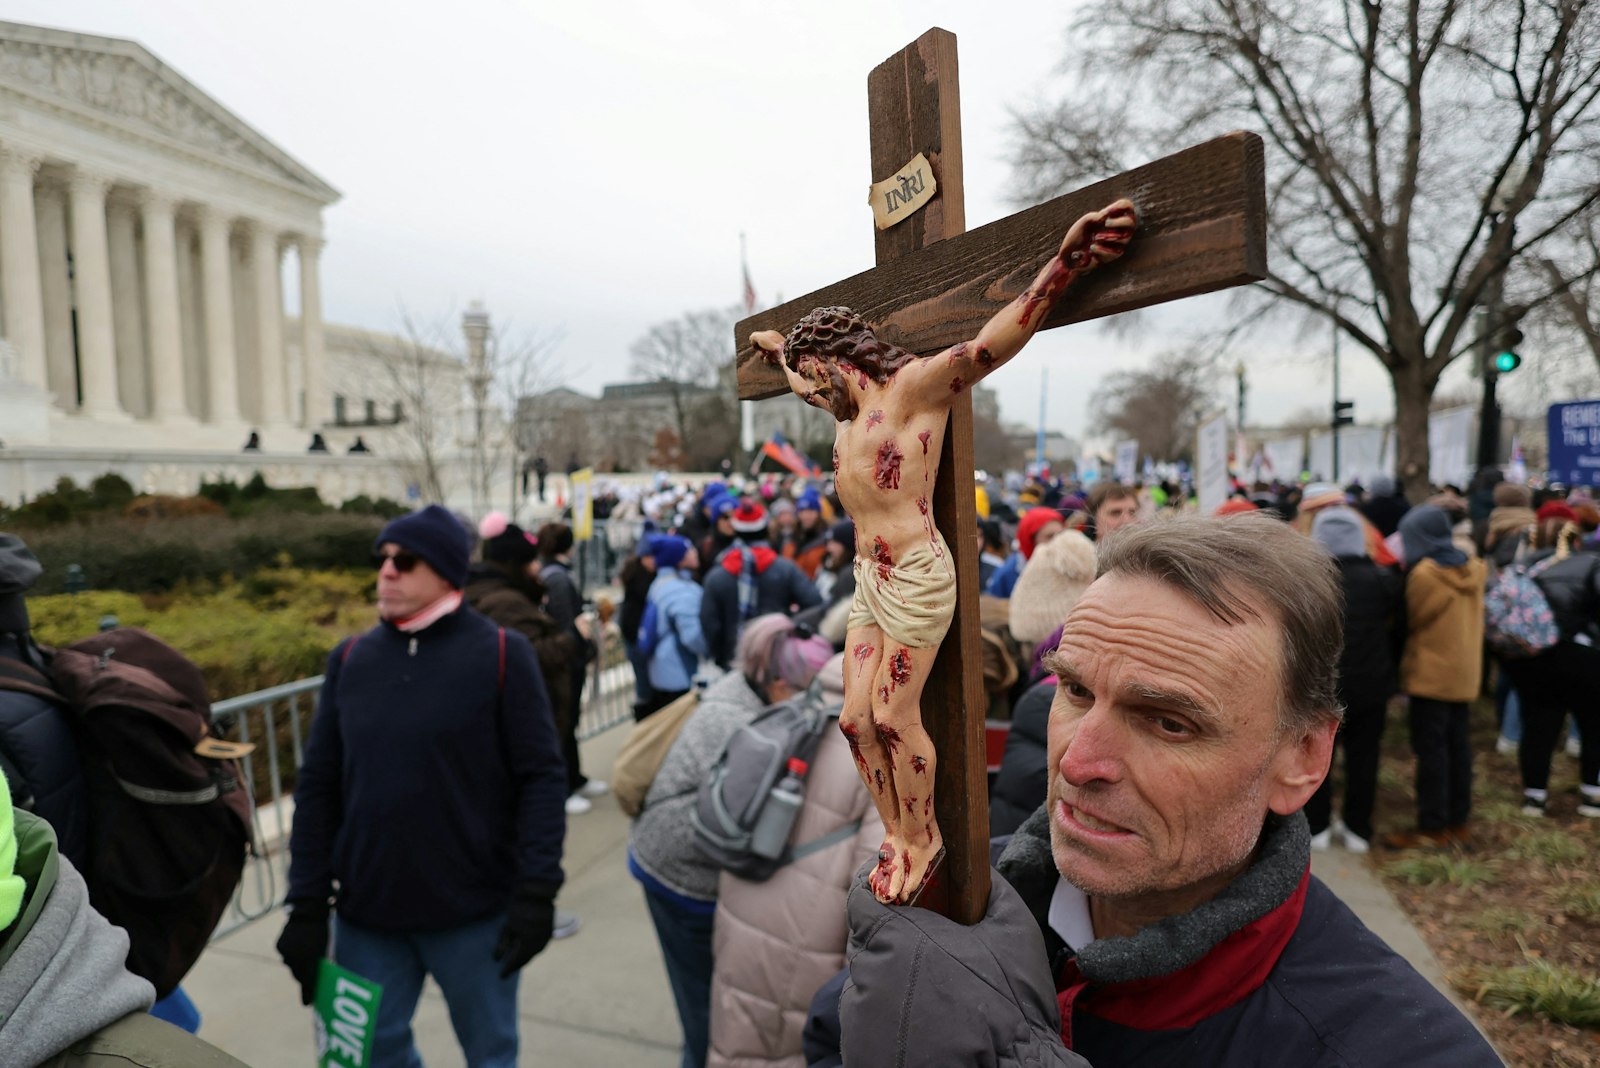 A man carries a crucifix outside the U.S. Supreme Court while participating in the 49th annual March for Life in Washington Jan. 21, 2022. (CNS photo/Jim Bourg, Reuters)